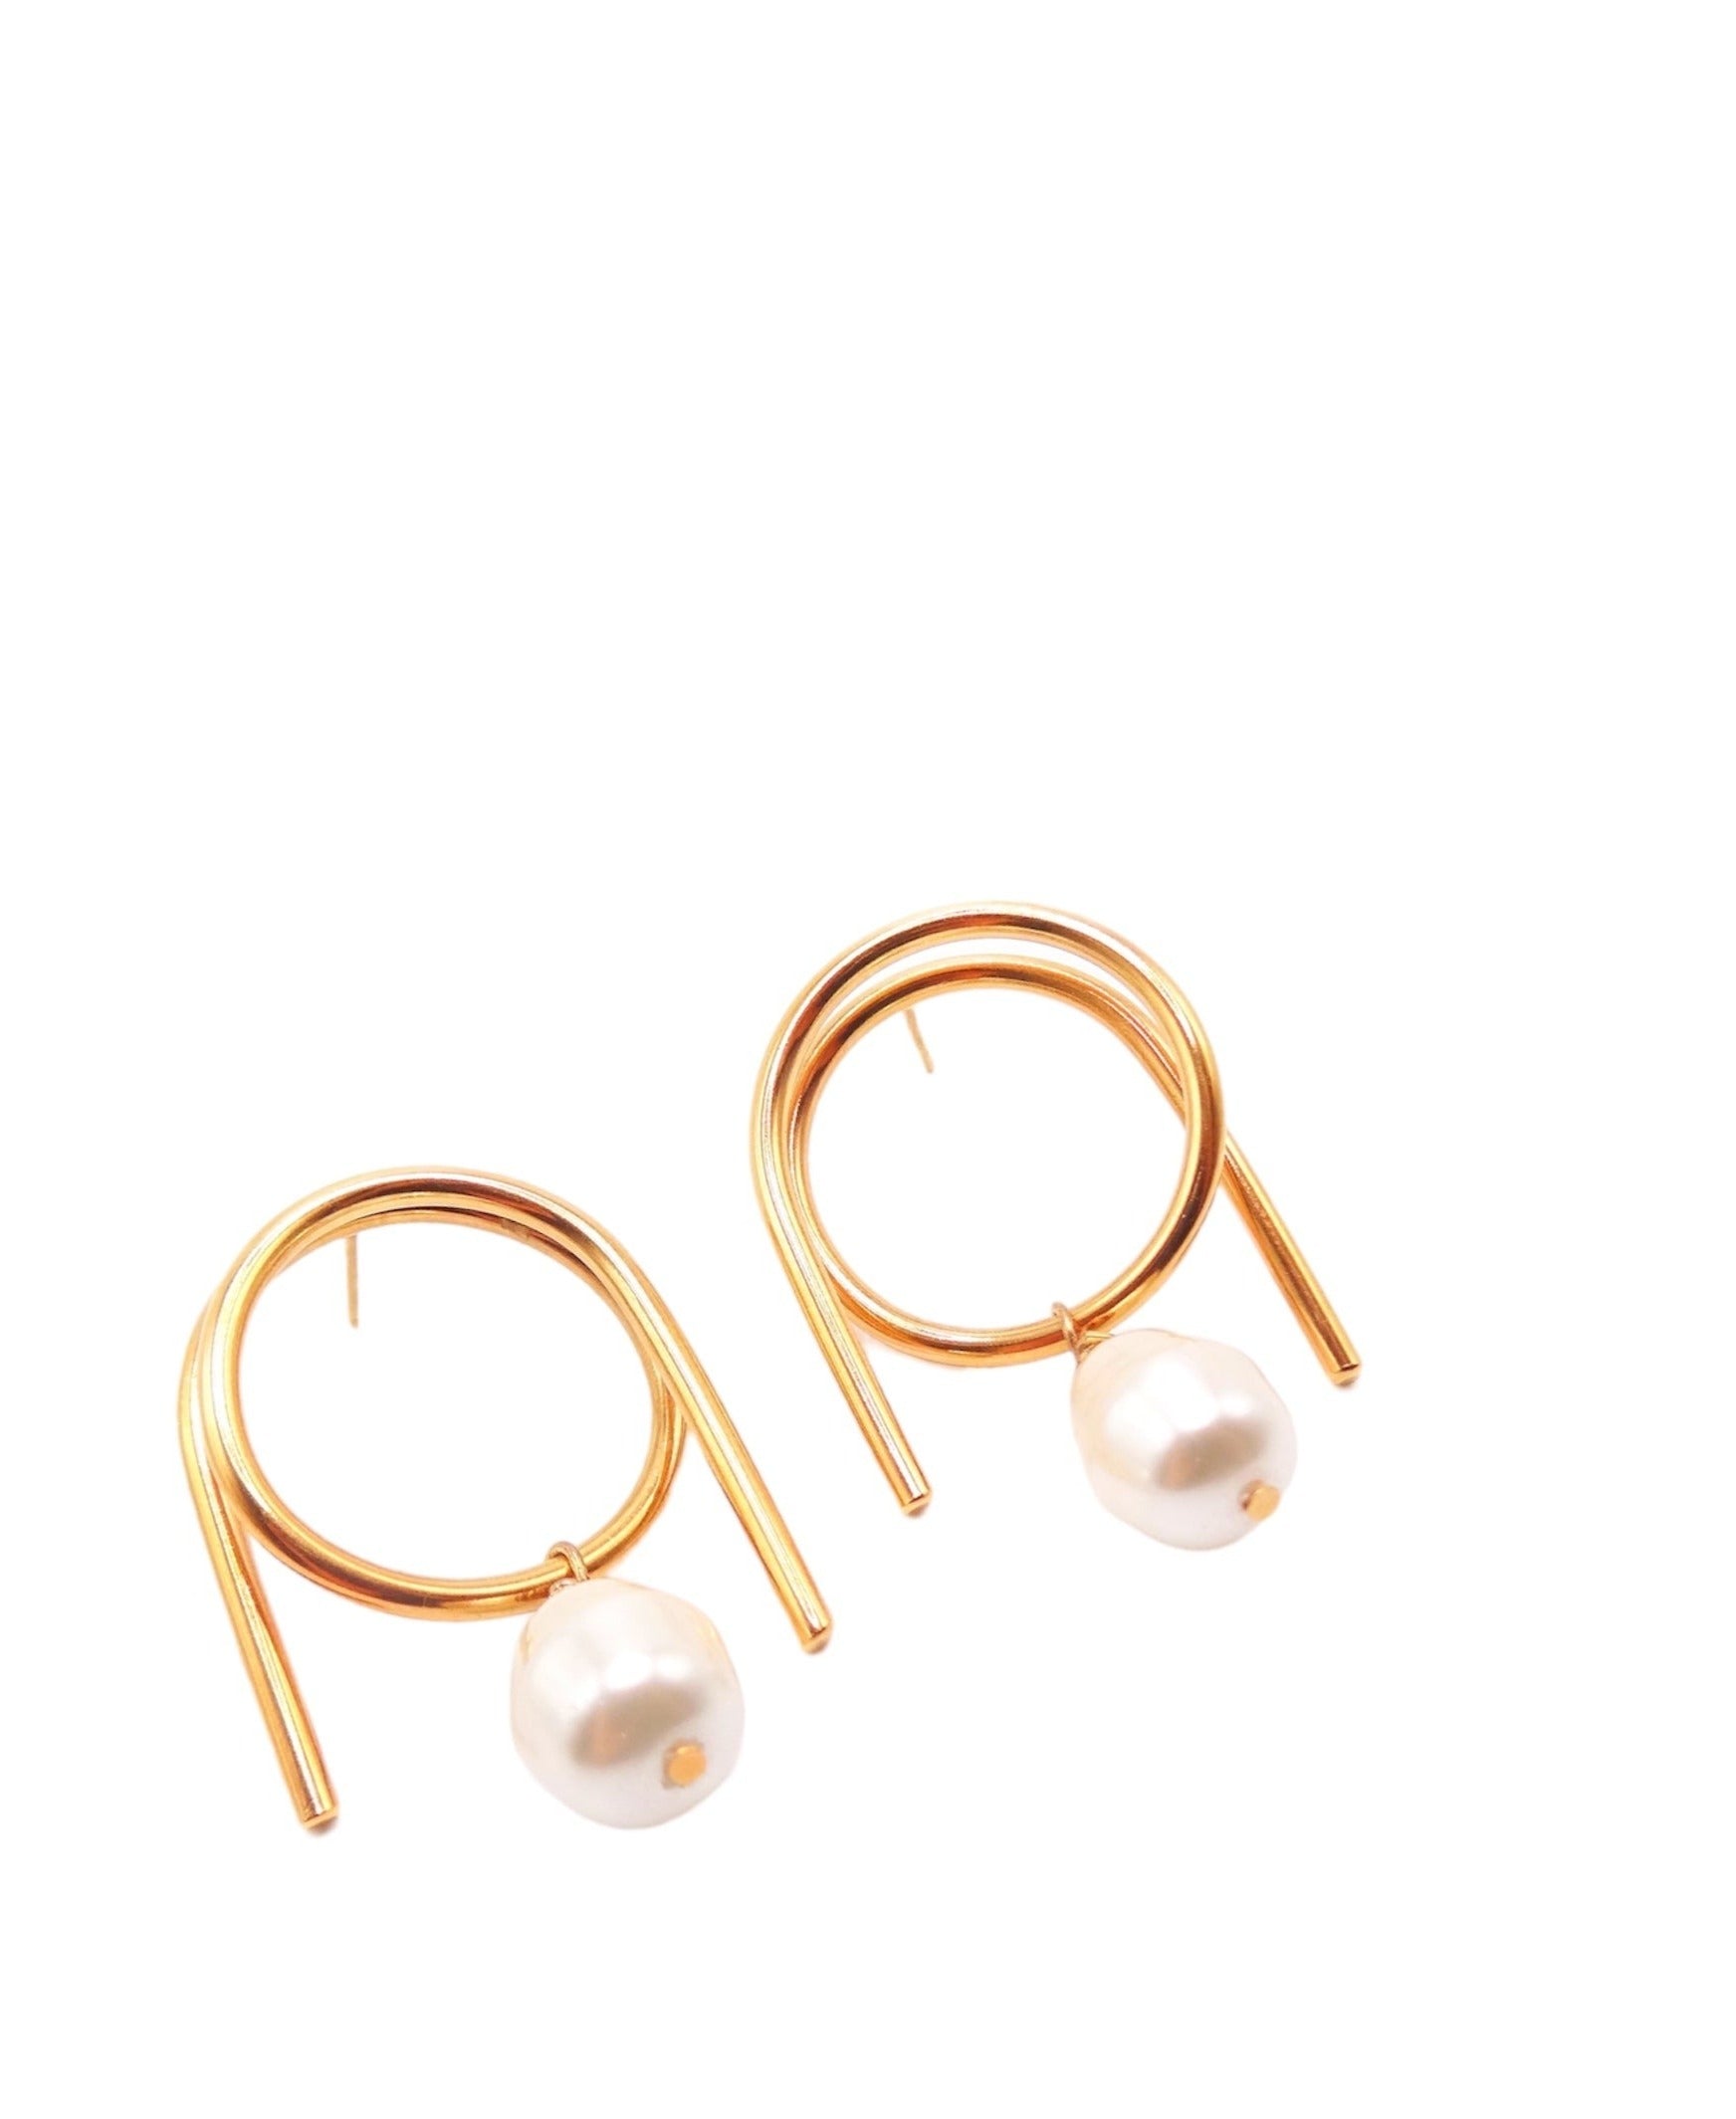 round spiral gold 2 n 1 earrings with white pearls